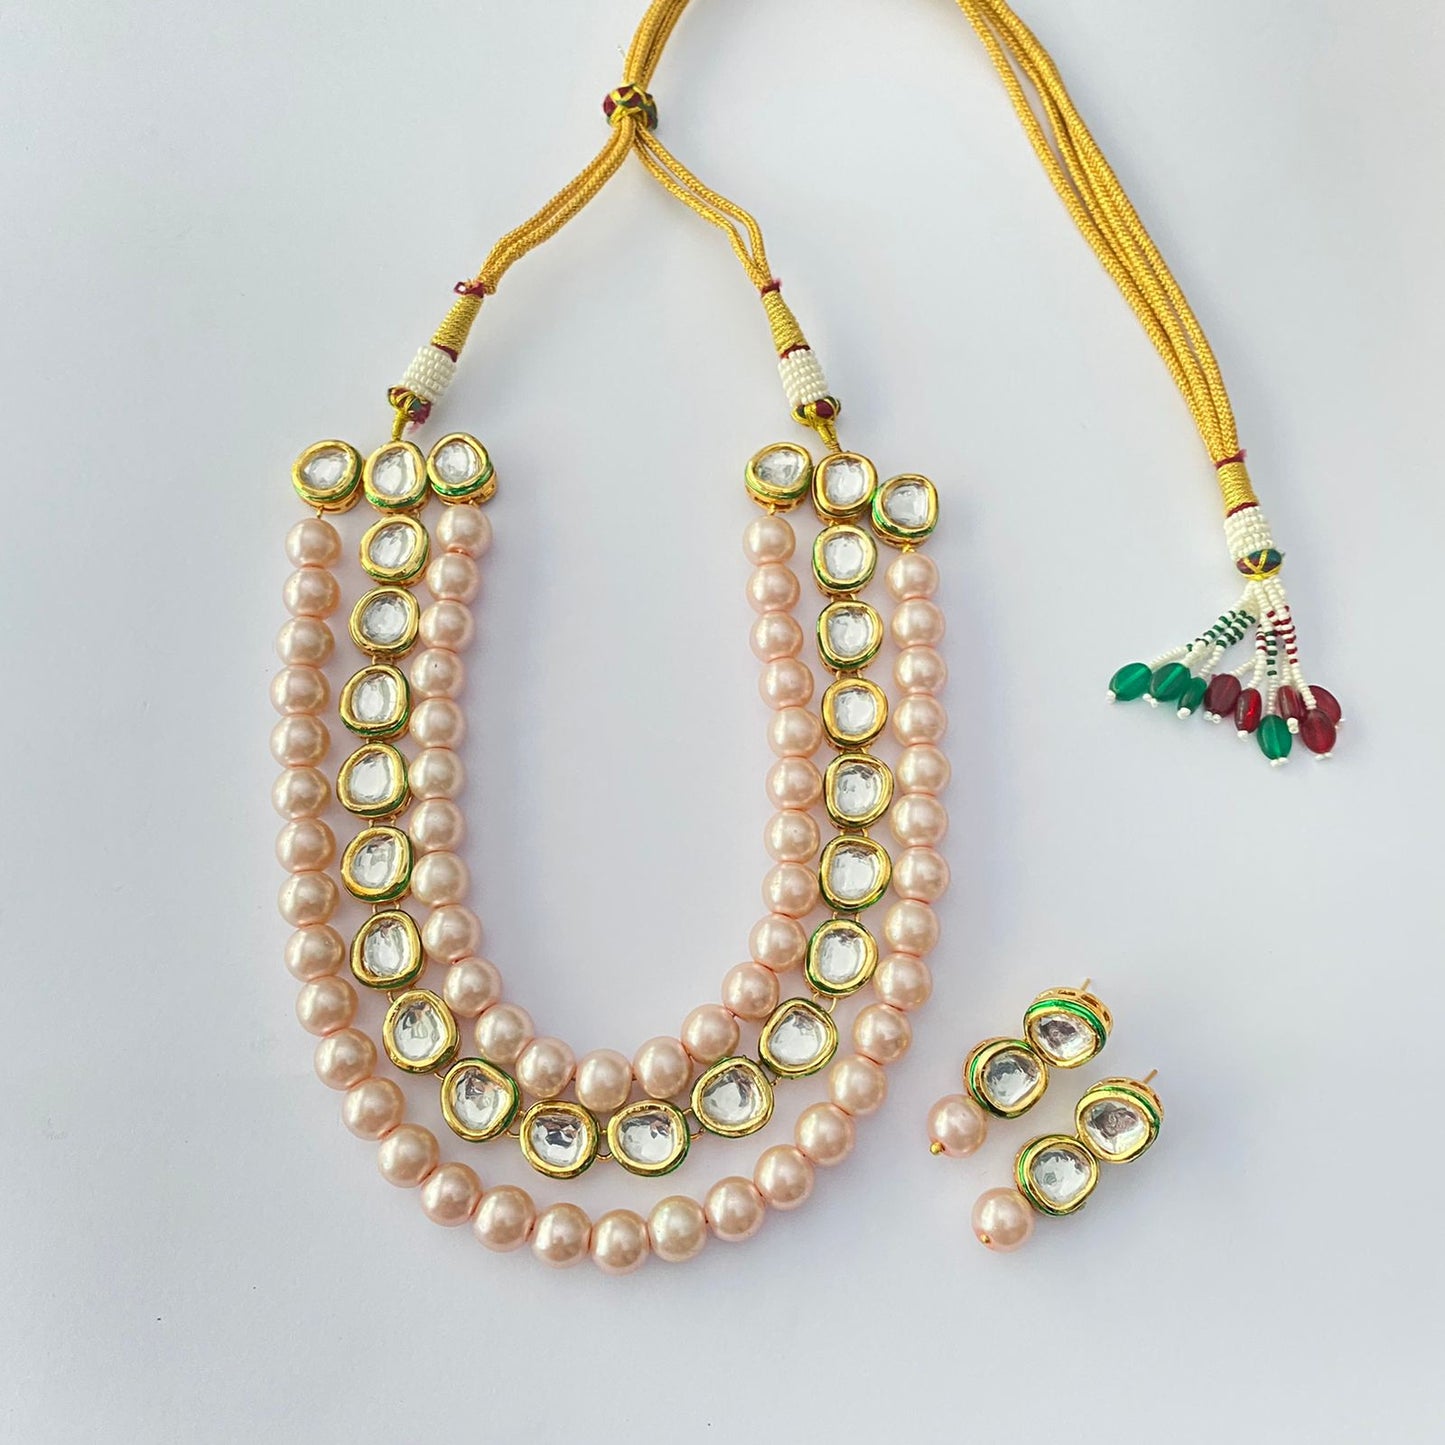 Kundan Polki Off White Pearl Hand Made Latest Design Necklace For Women.